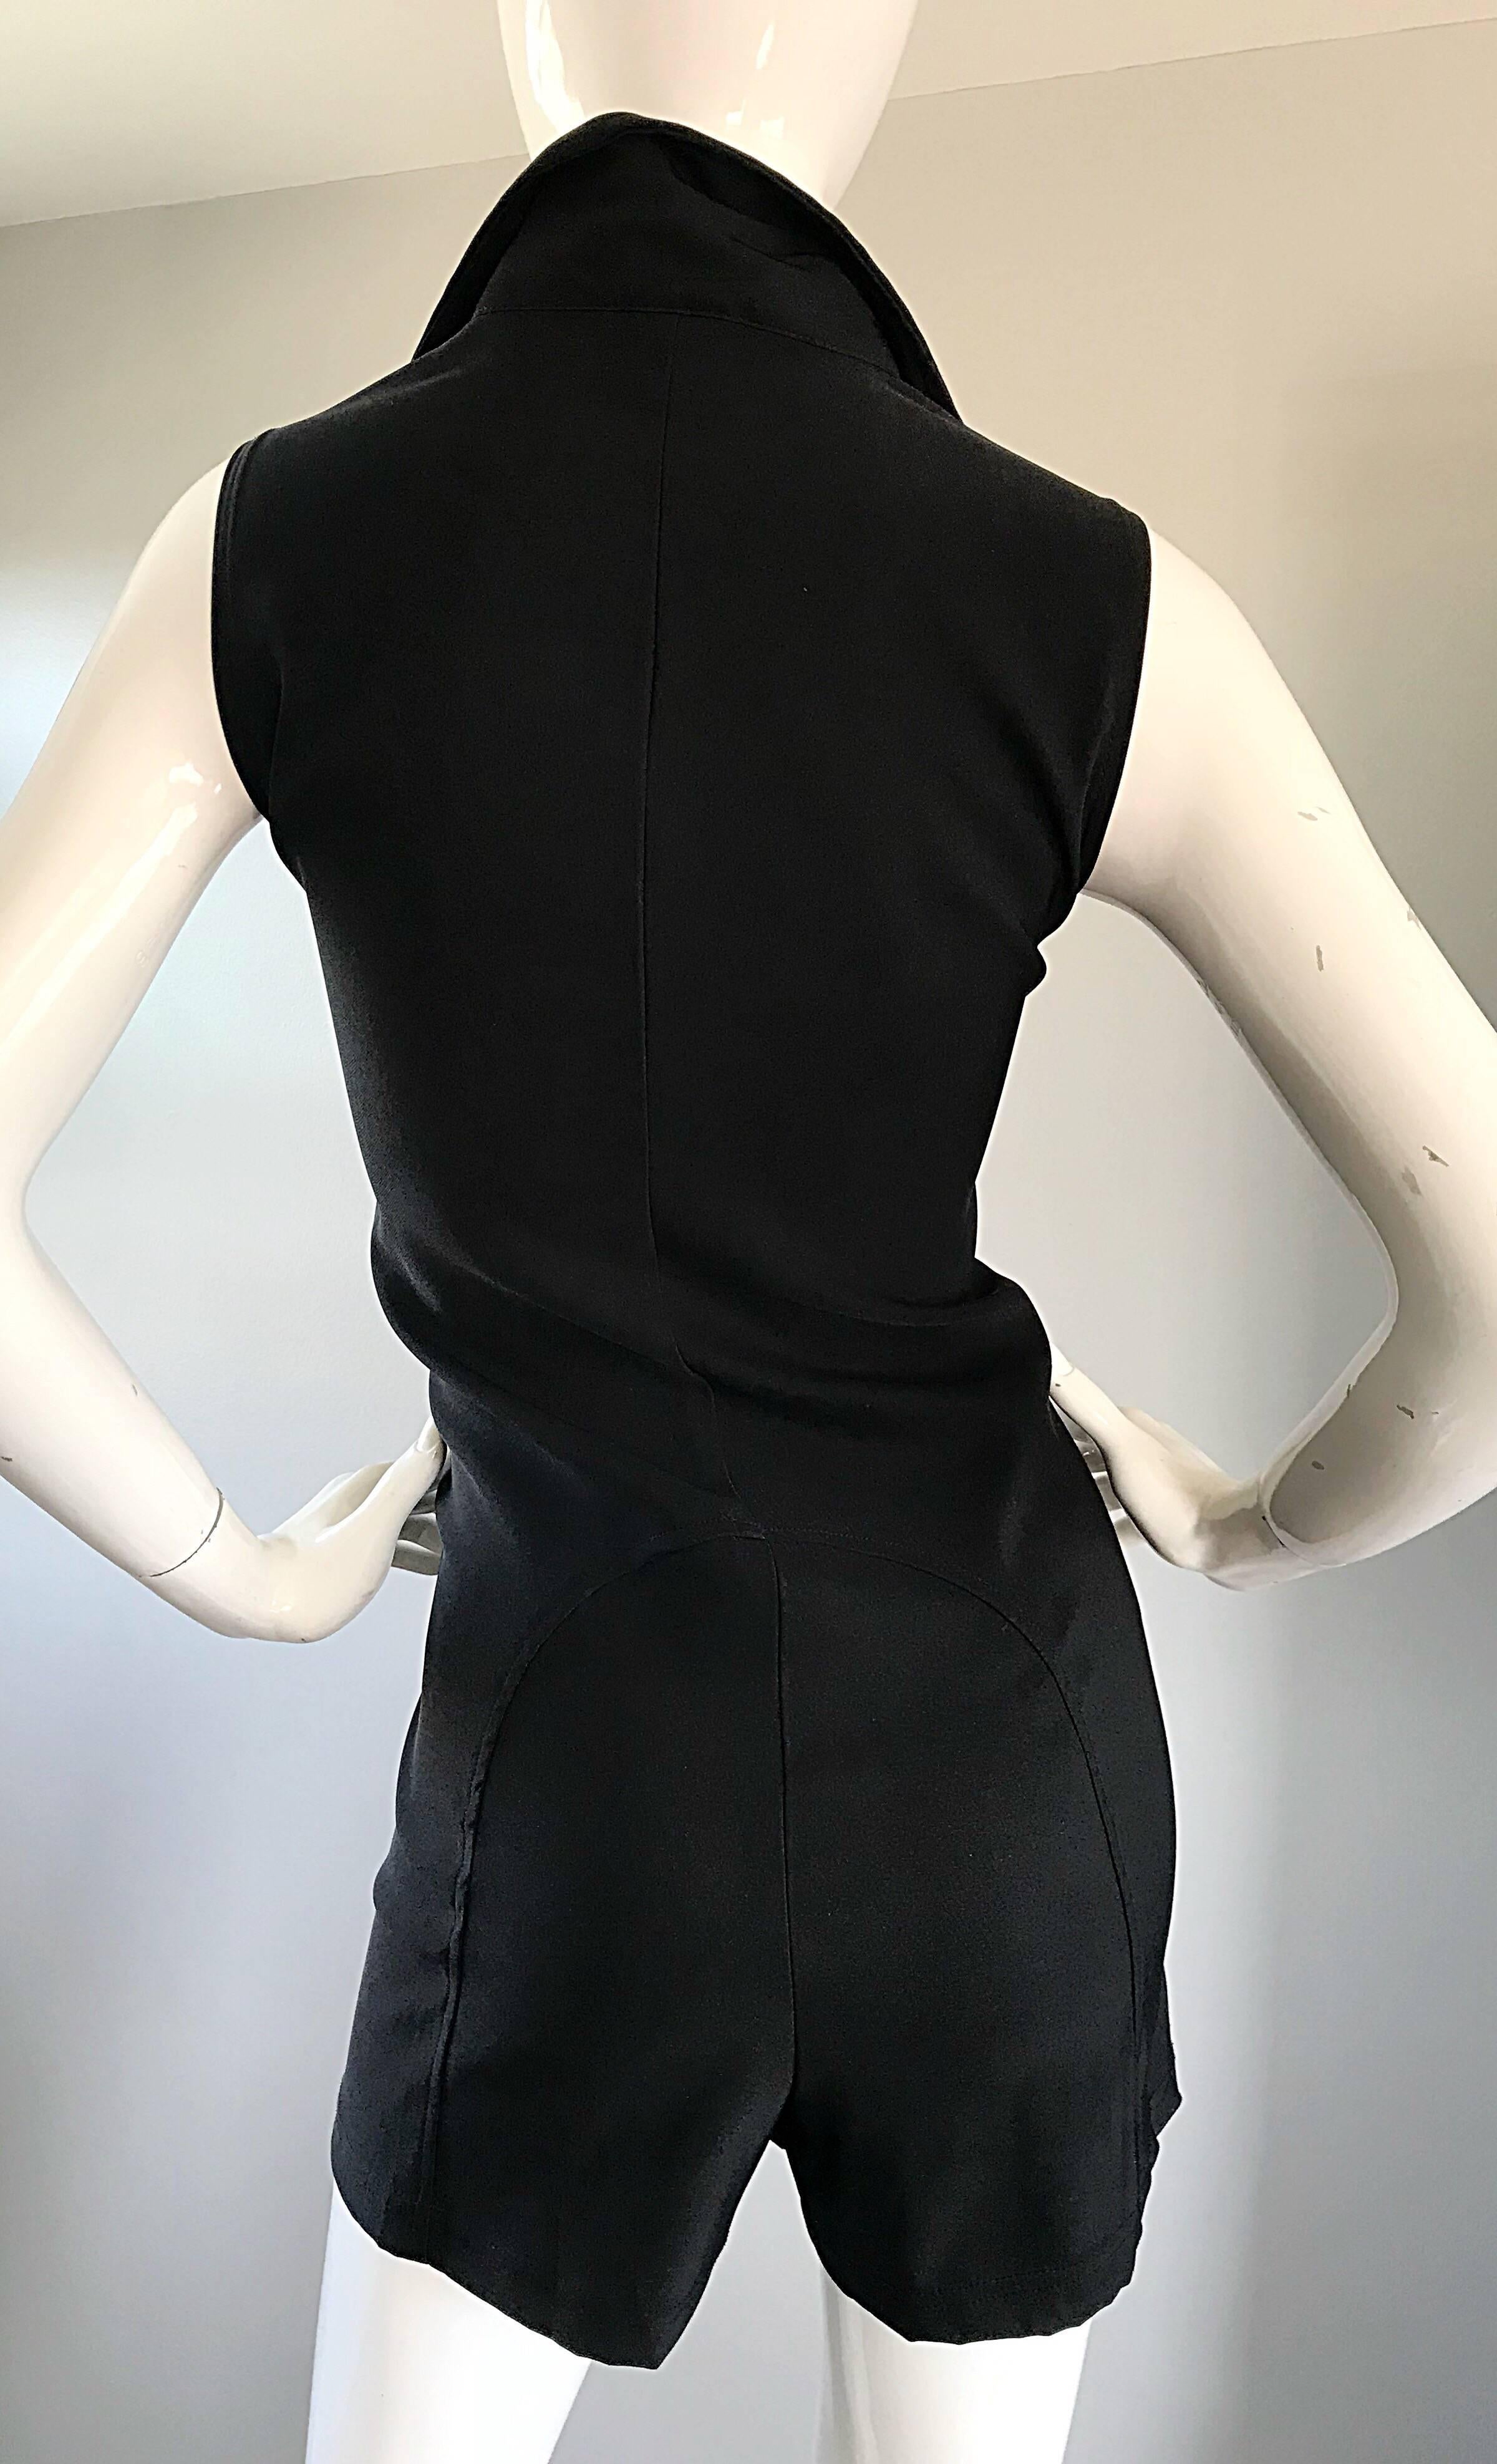 1990s Does 1970s Black Crepe Sleeveless One Piece 90s Vintage Romper Jumpsuit For Sale 2